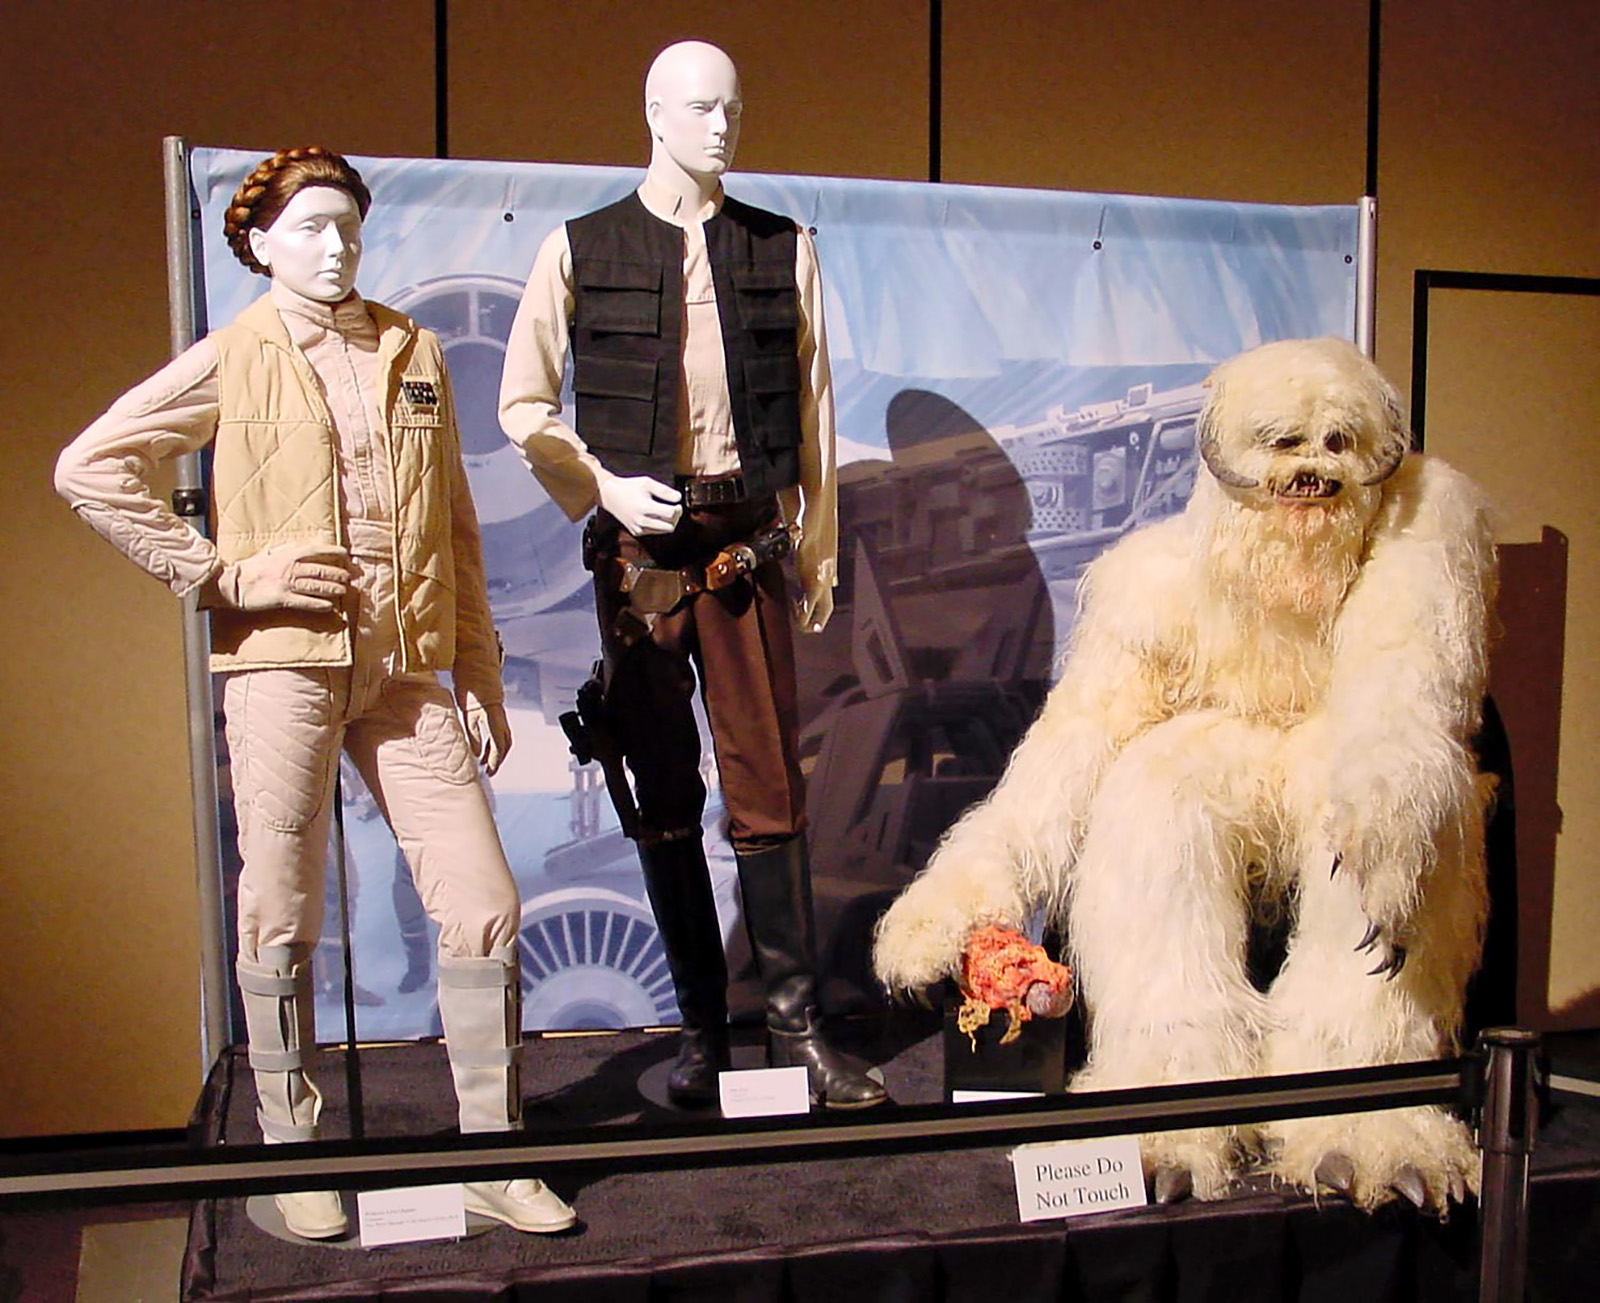 Empire Strikes Back Costumes and Wampa